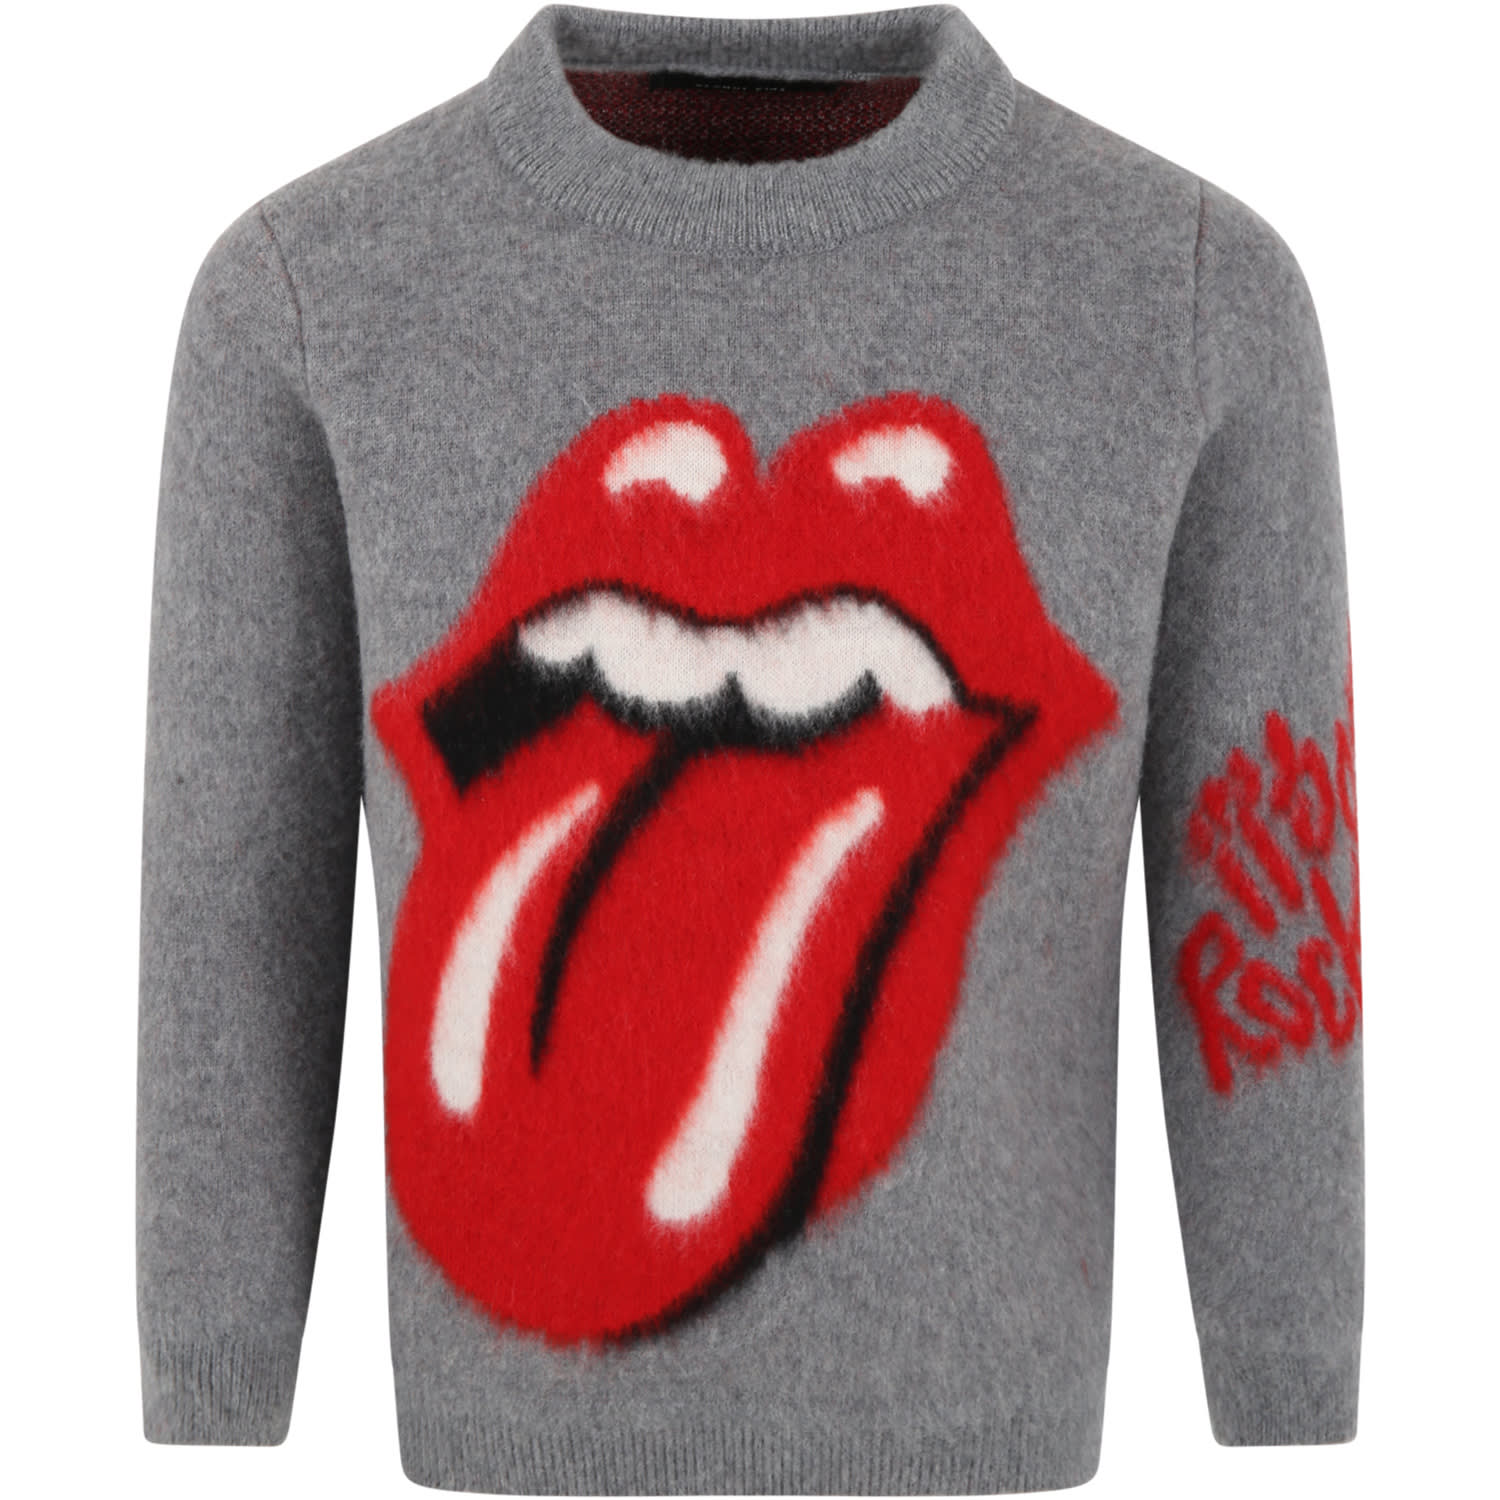 Alanui Gray Sweater For Kids With The Rolling Stones Tongue